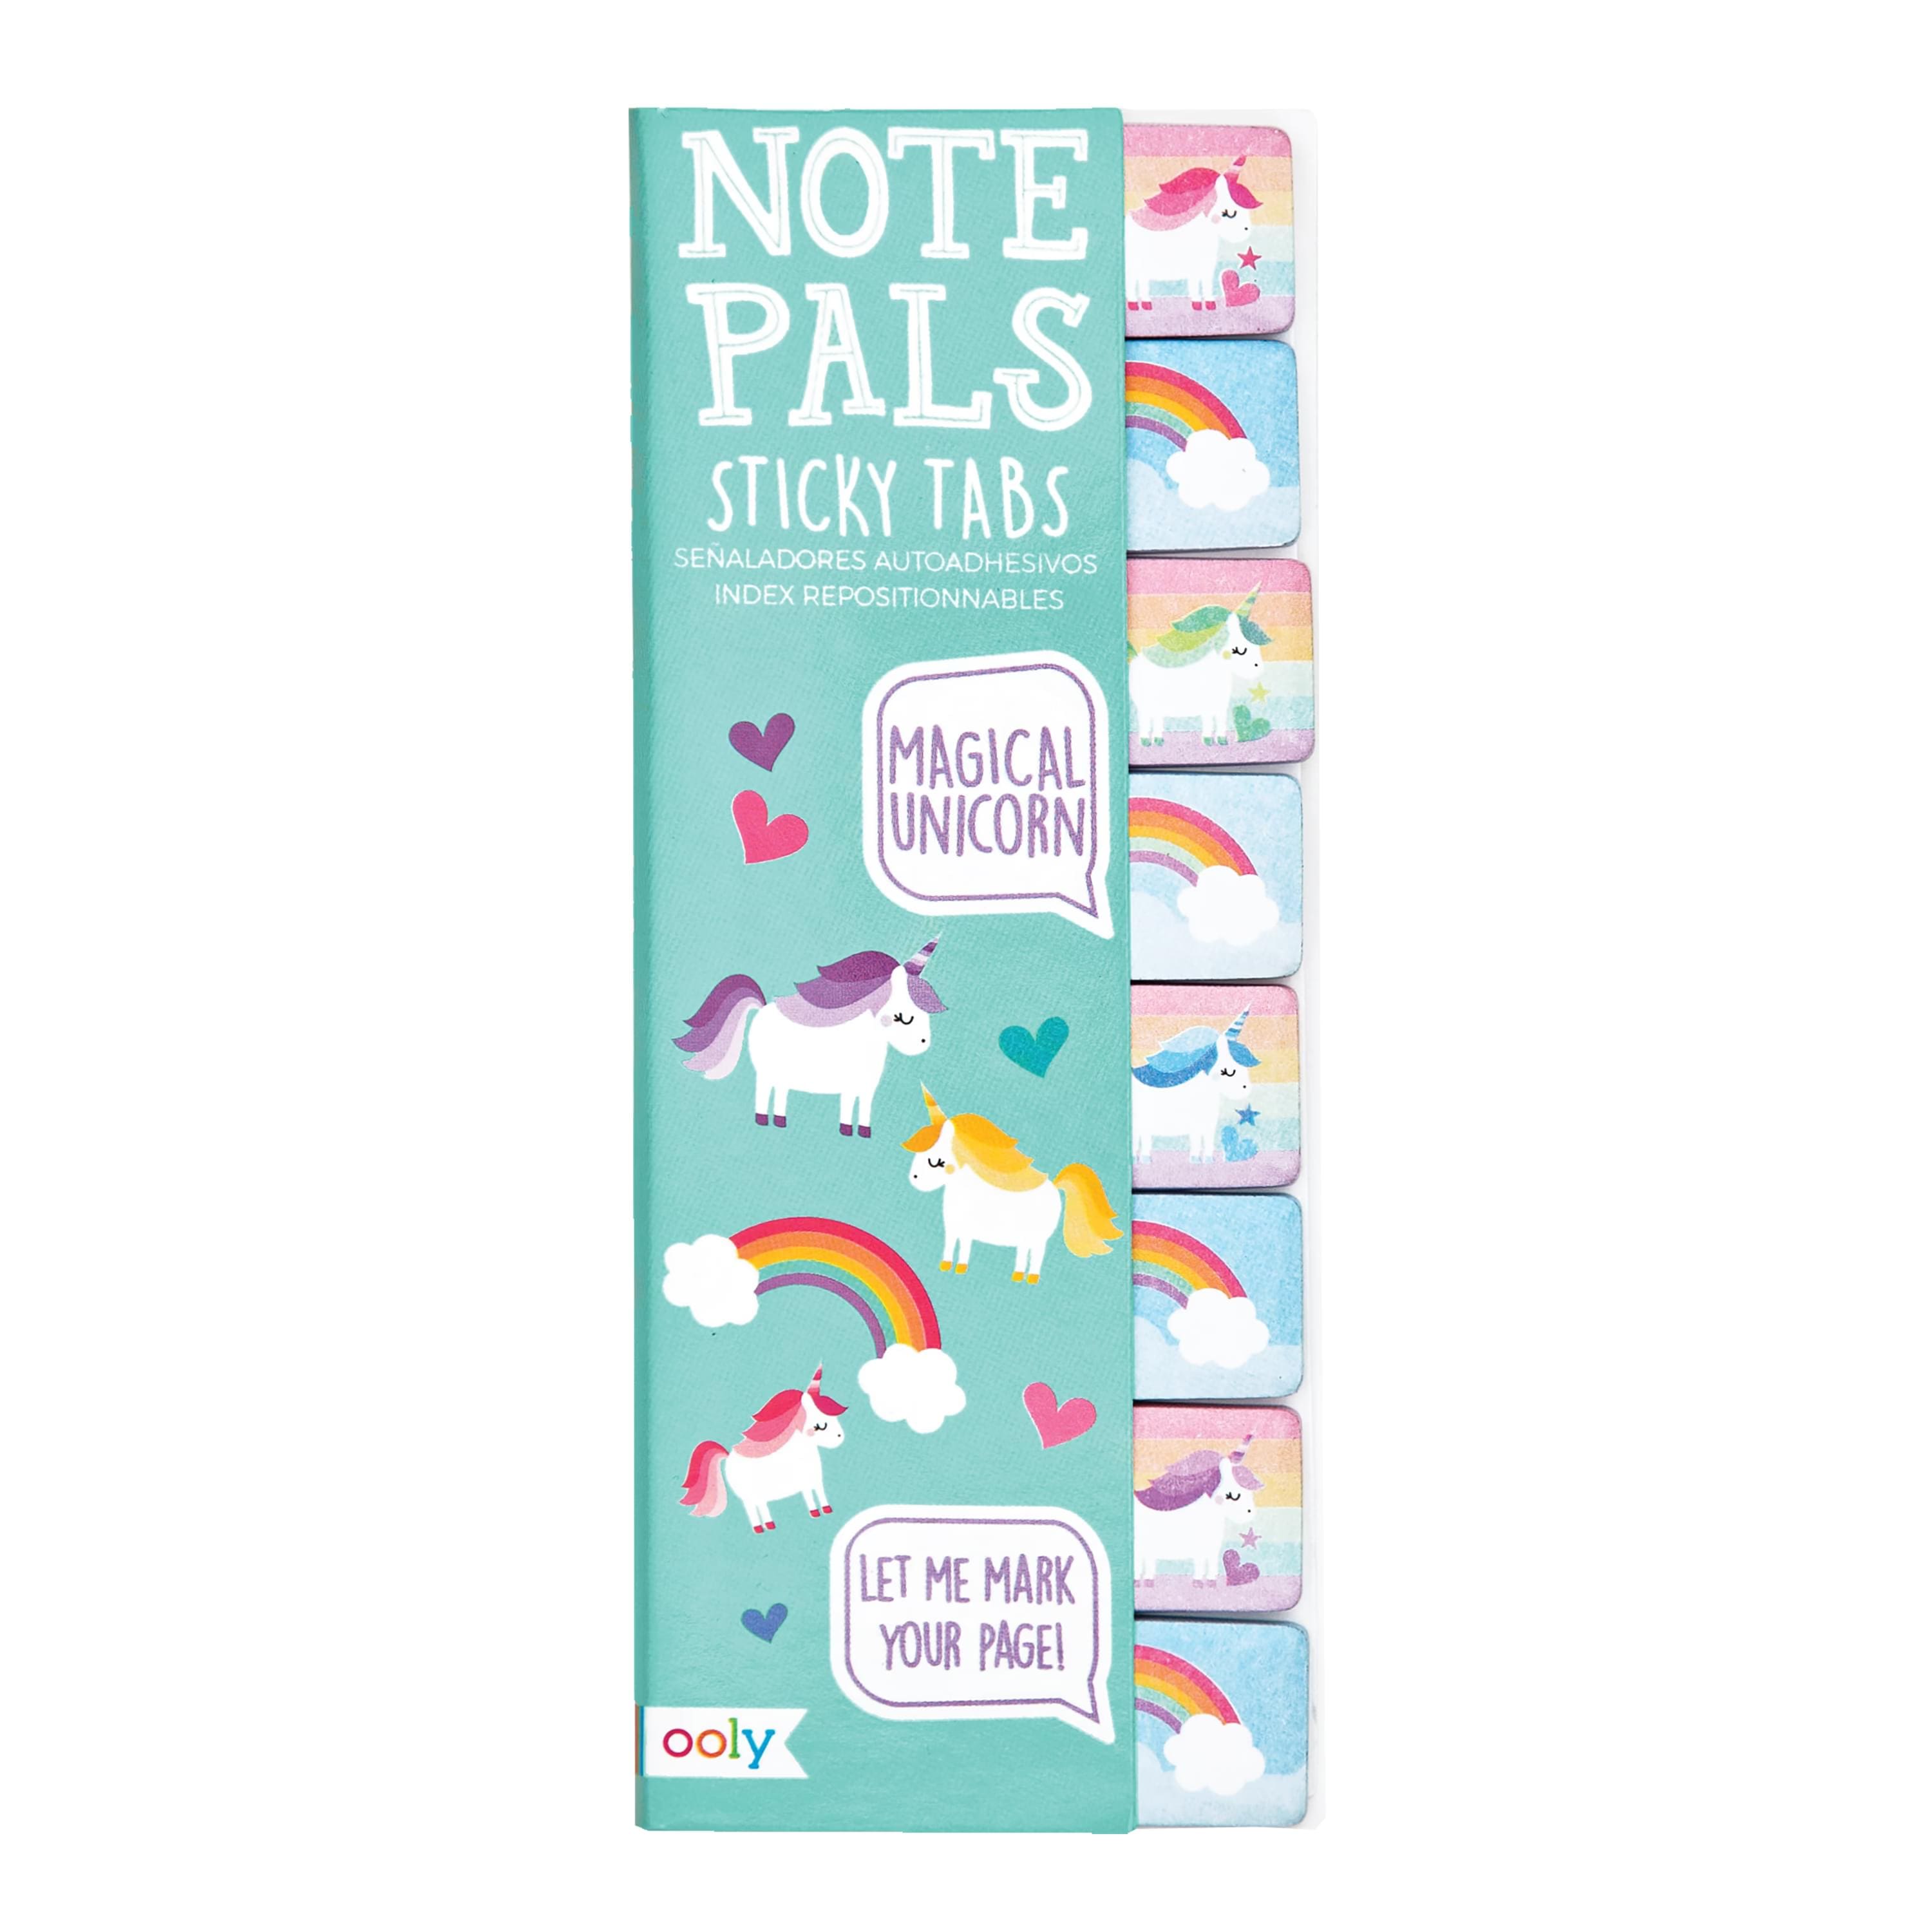 OOLY Note Pals Magical Unicorn Sticky Note Tabs